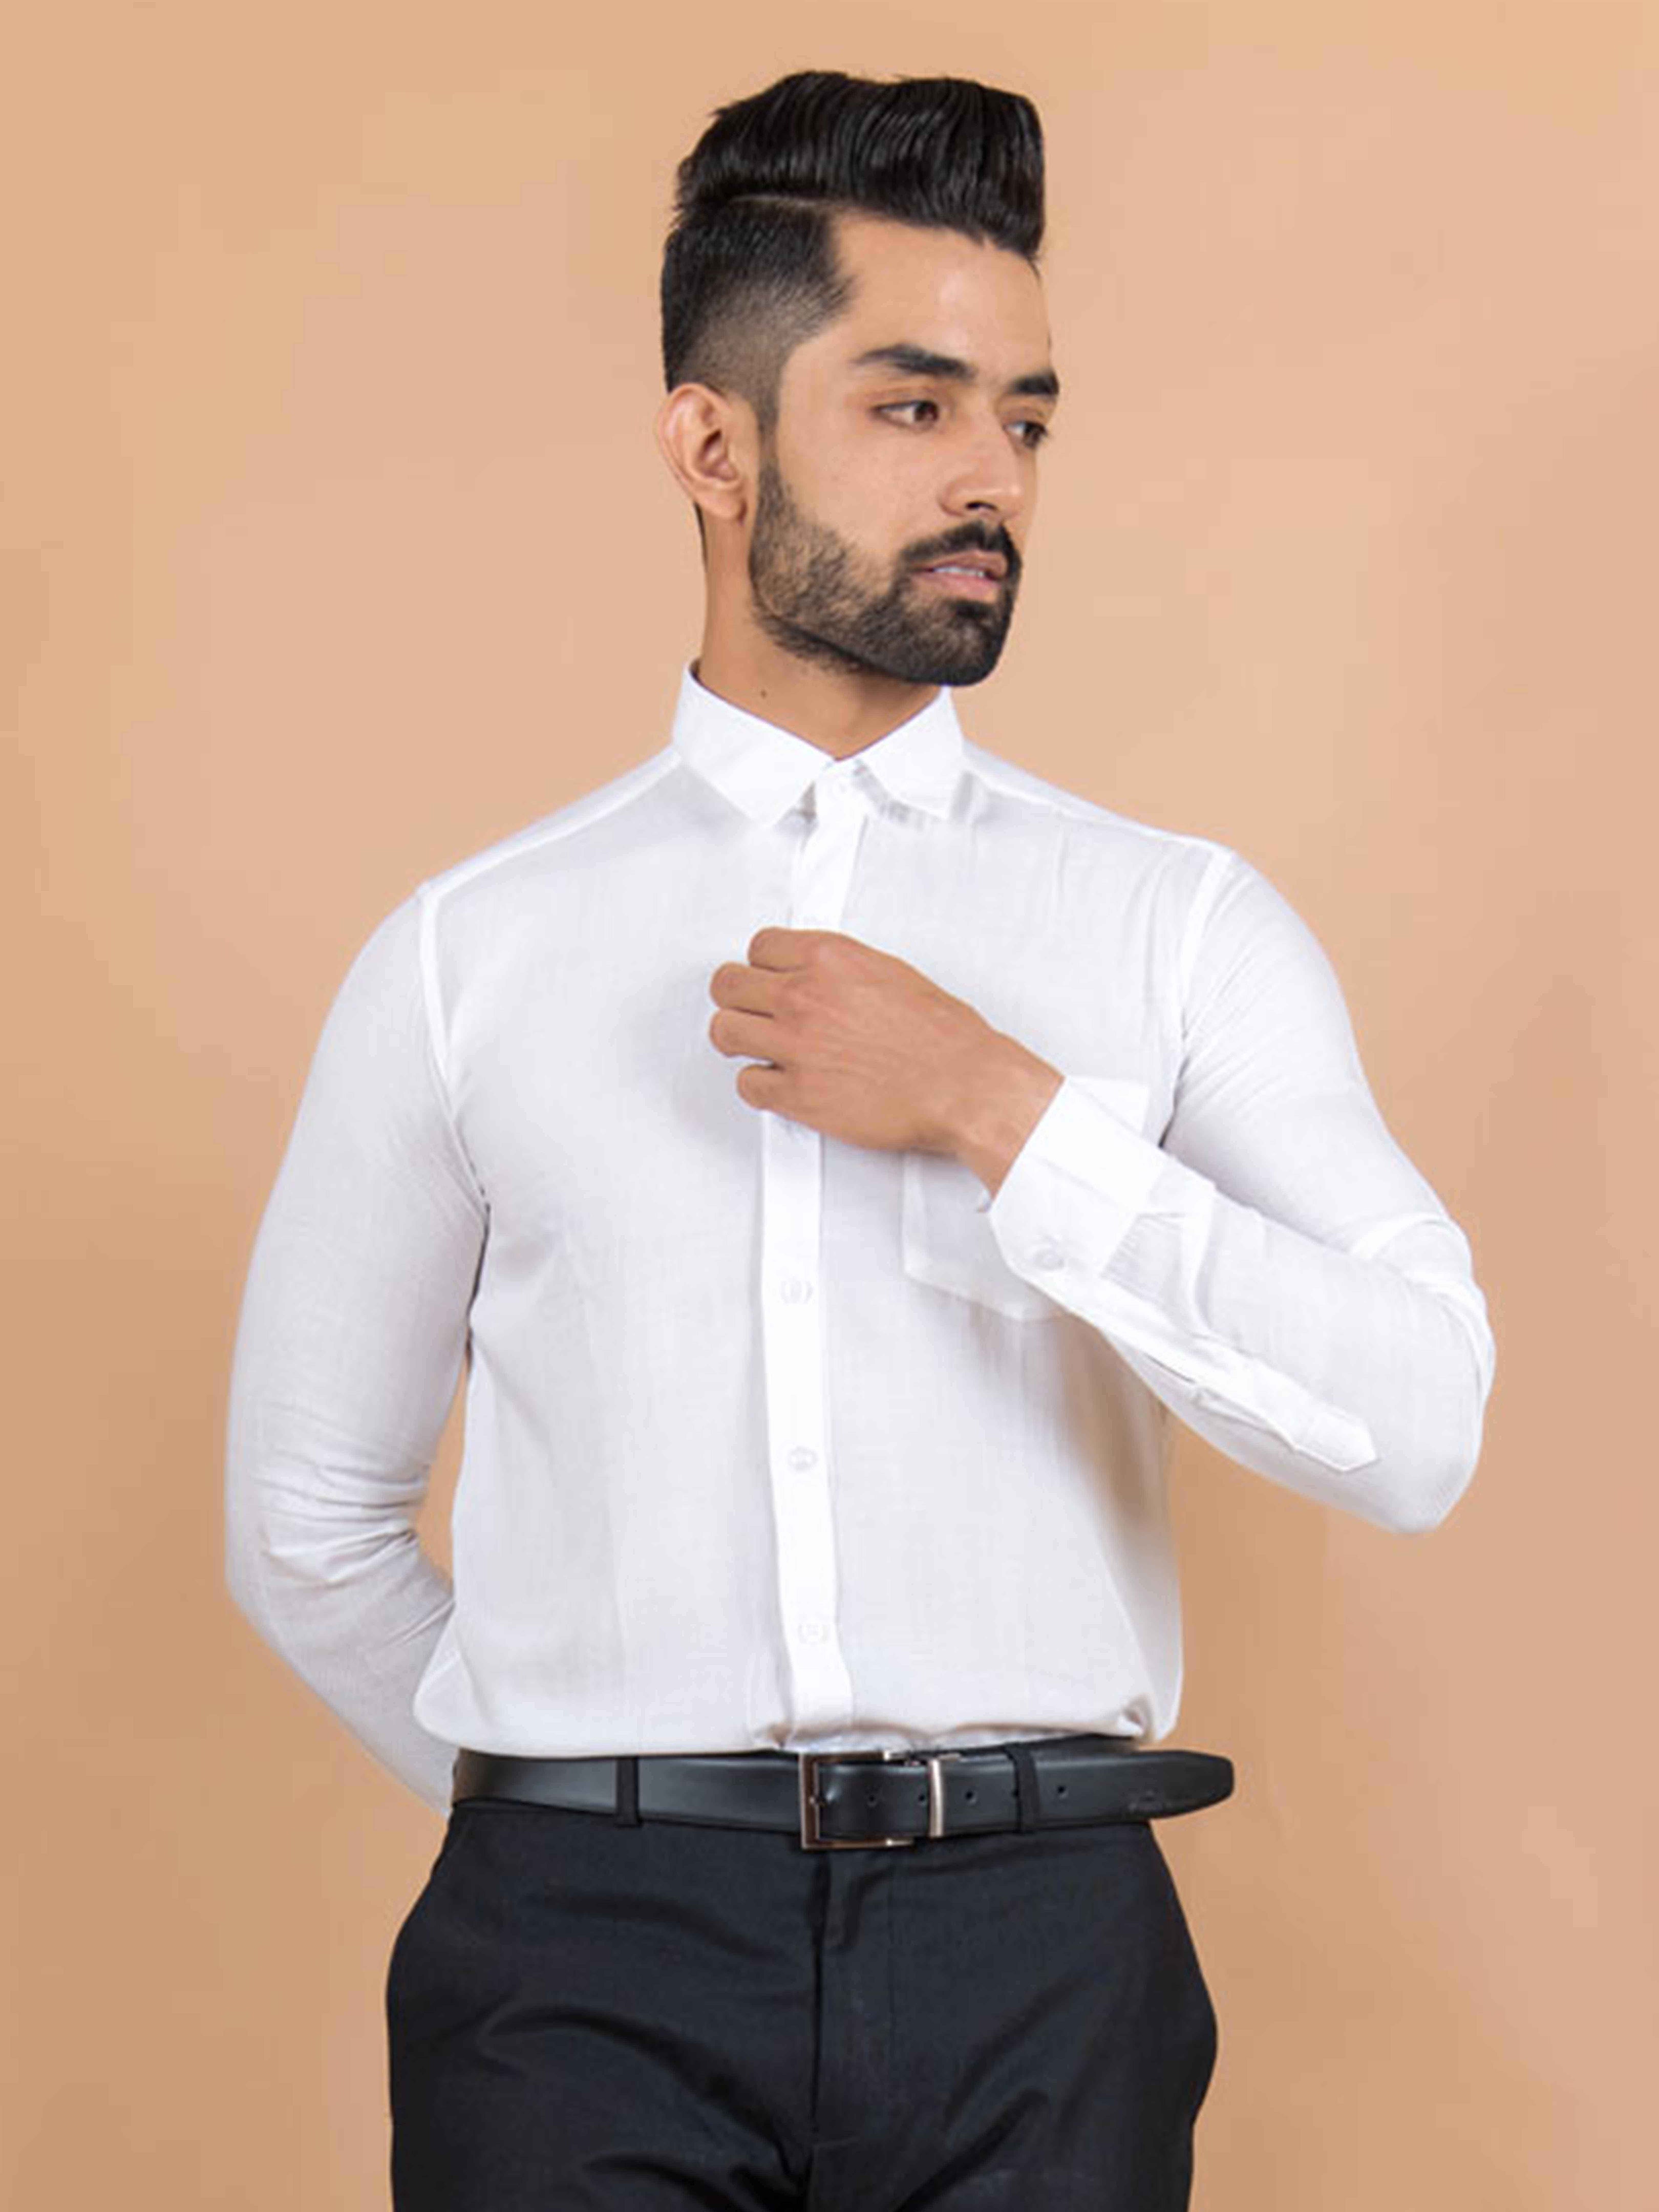 Buy White Solid Cotton Shirt Online At Best Prices | Tistabene